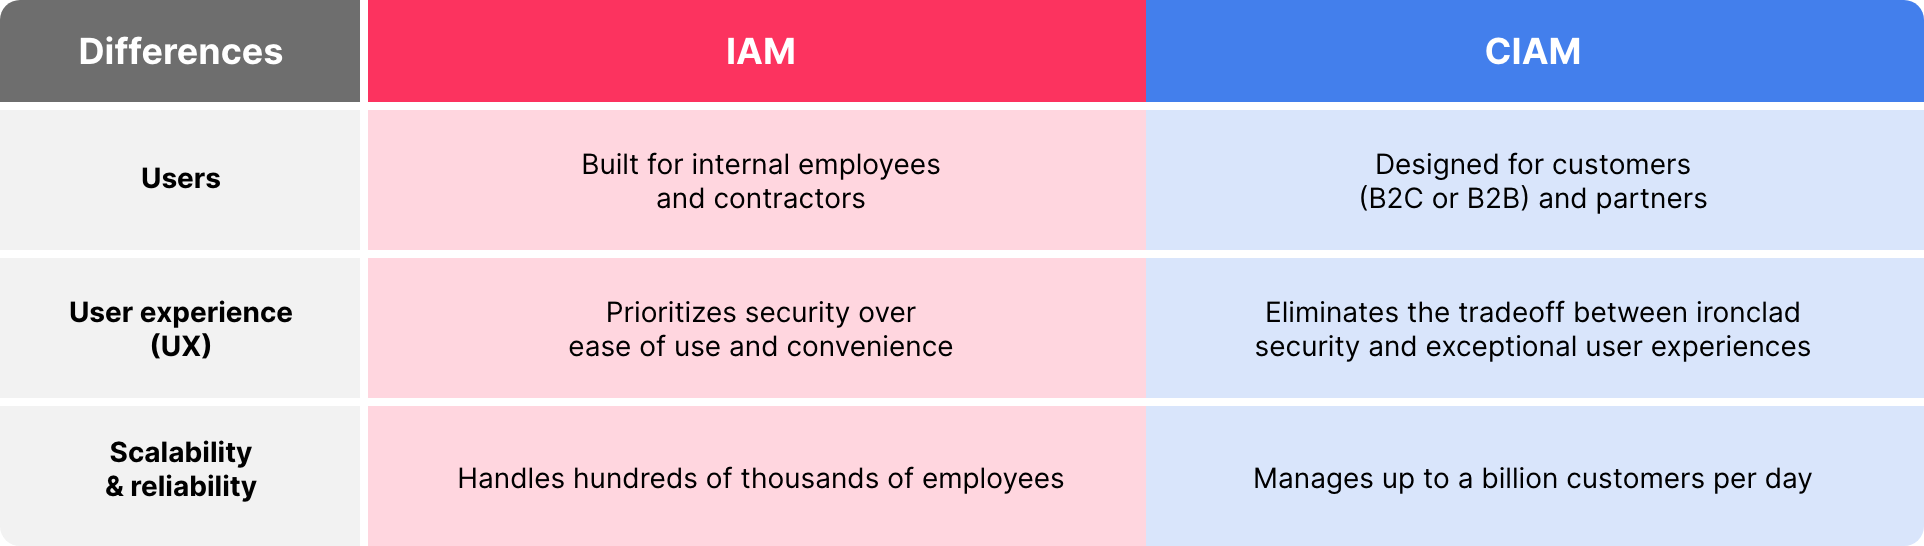 Some differences in IAM and CIAM lie in the user's experience and the scalability and reliability, as explained in this table